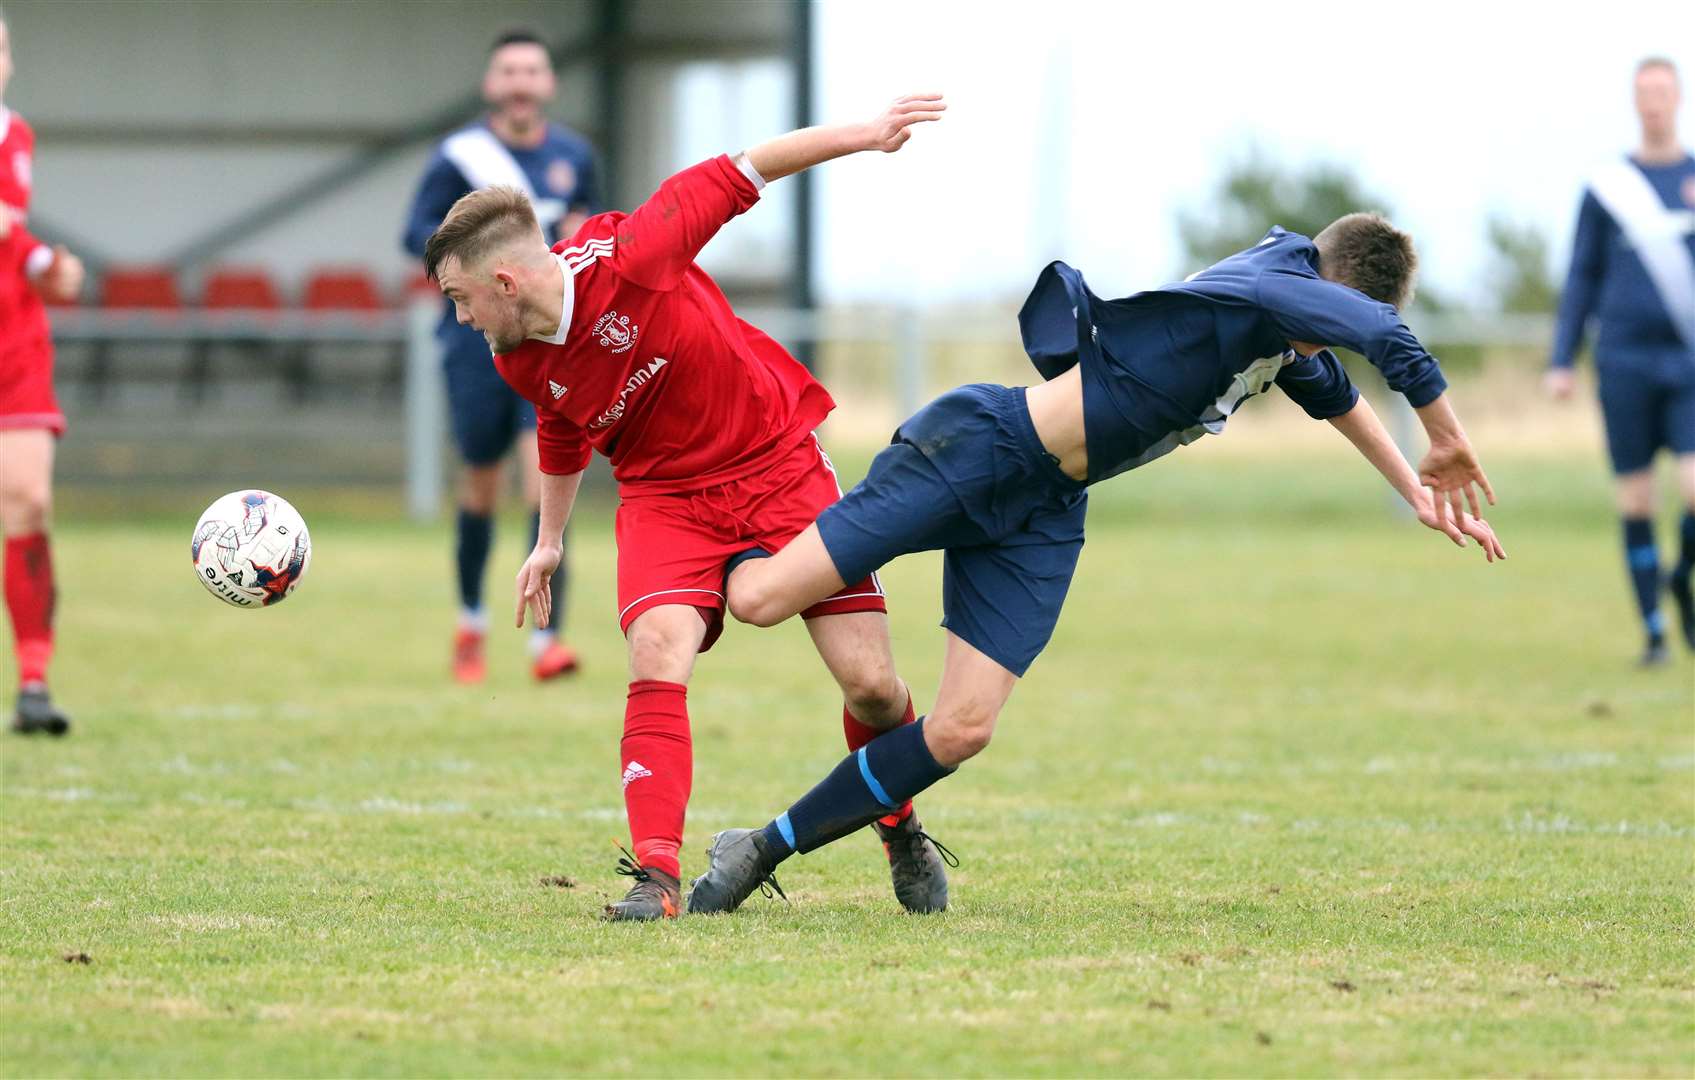 Thurso's Luke Manson in a painful tangle with Halkirk United's James Mackintosh during the derby clash at Morrison park. Picture: James Gunn